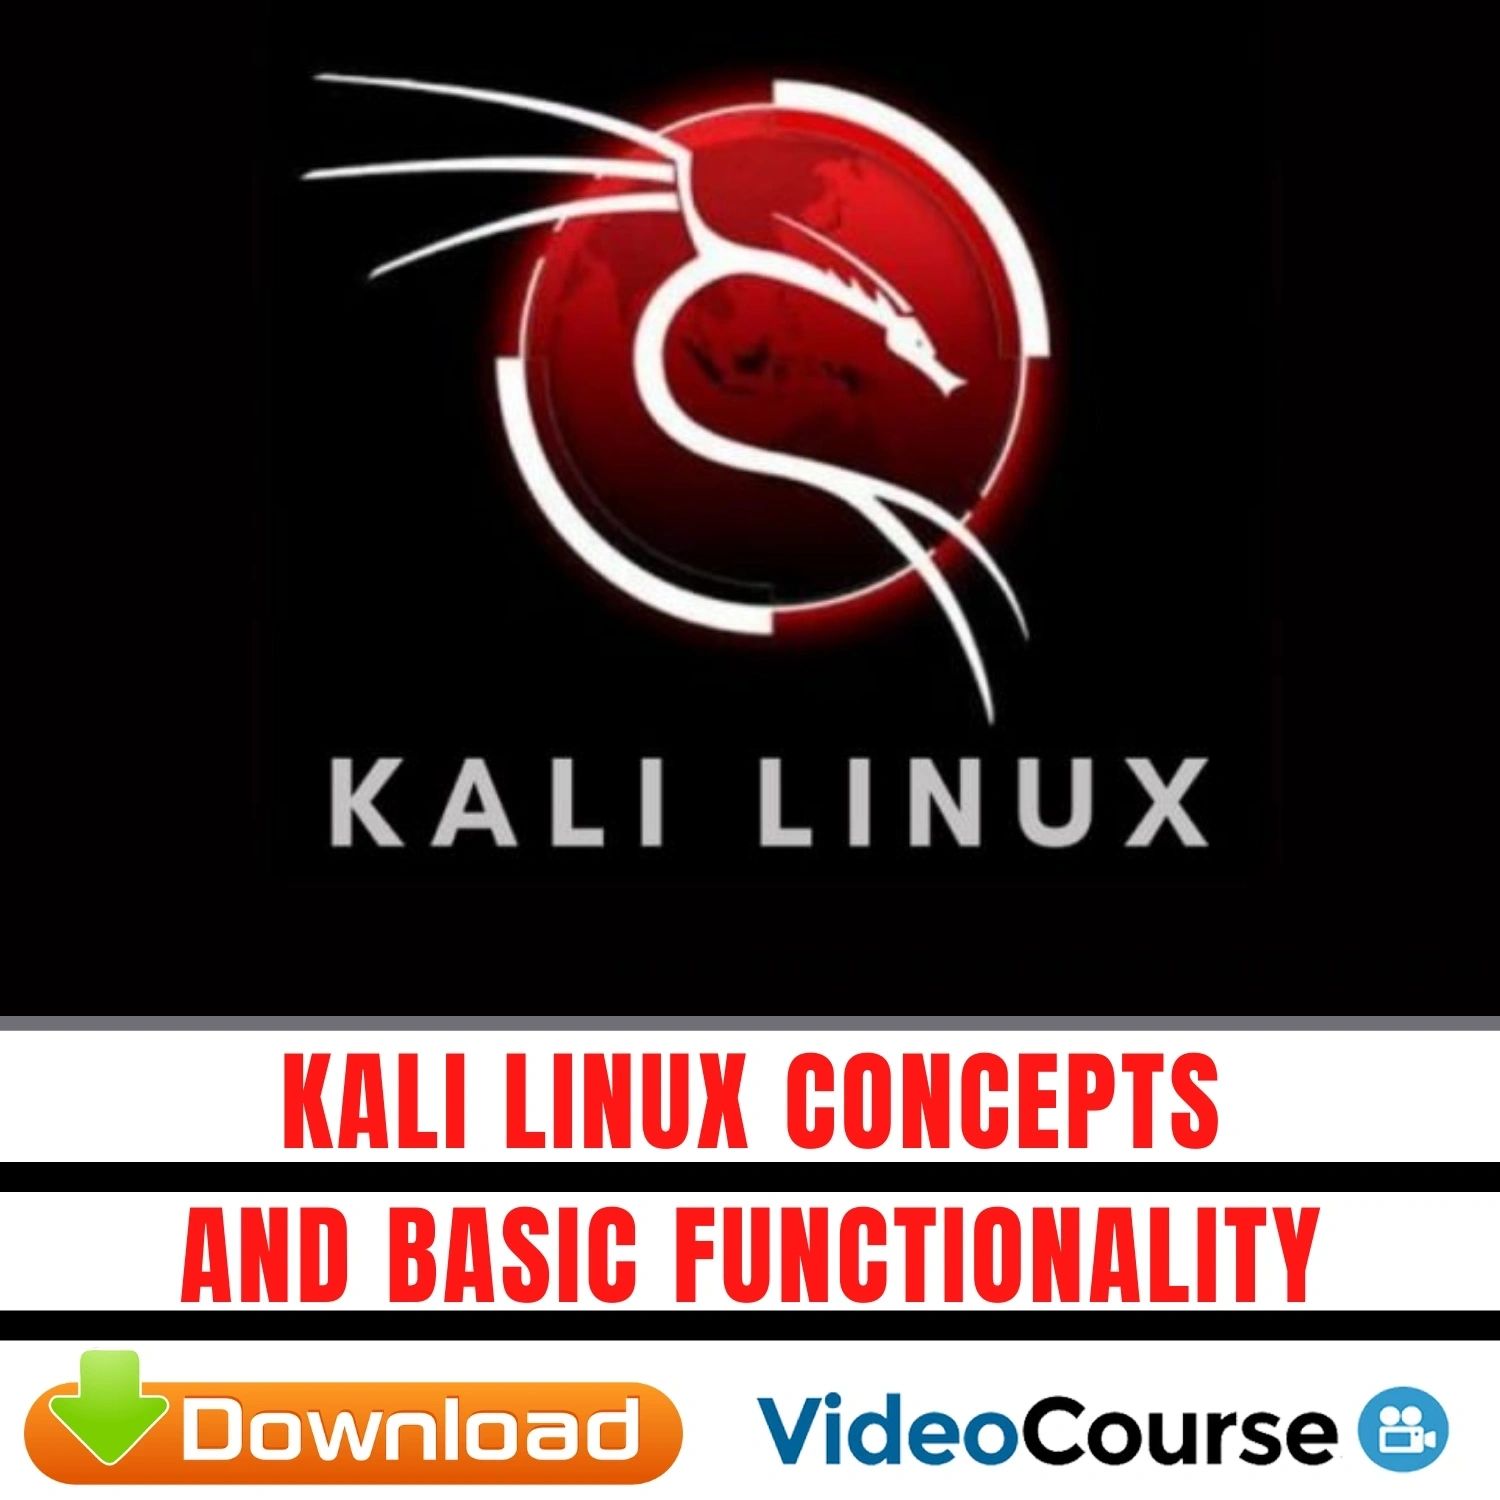 Kali Linux Concepts and Basic Functionality